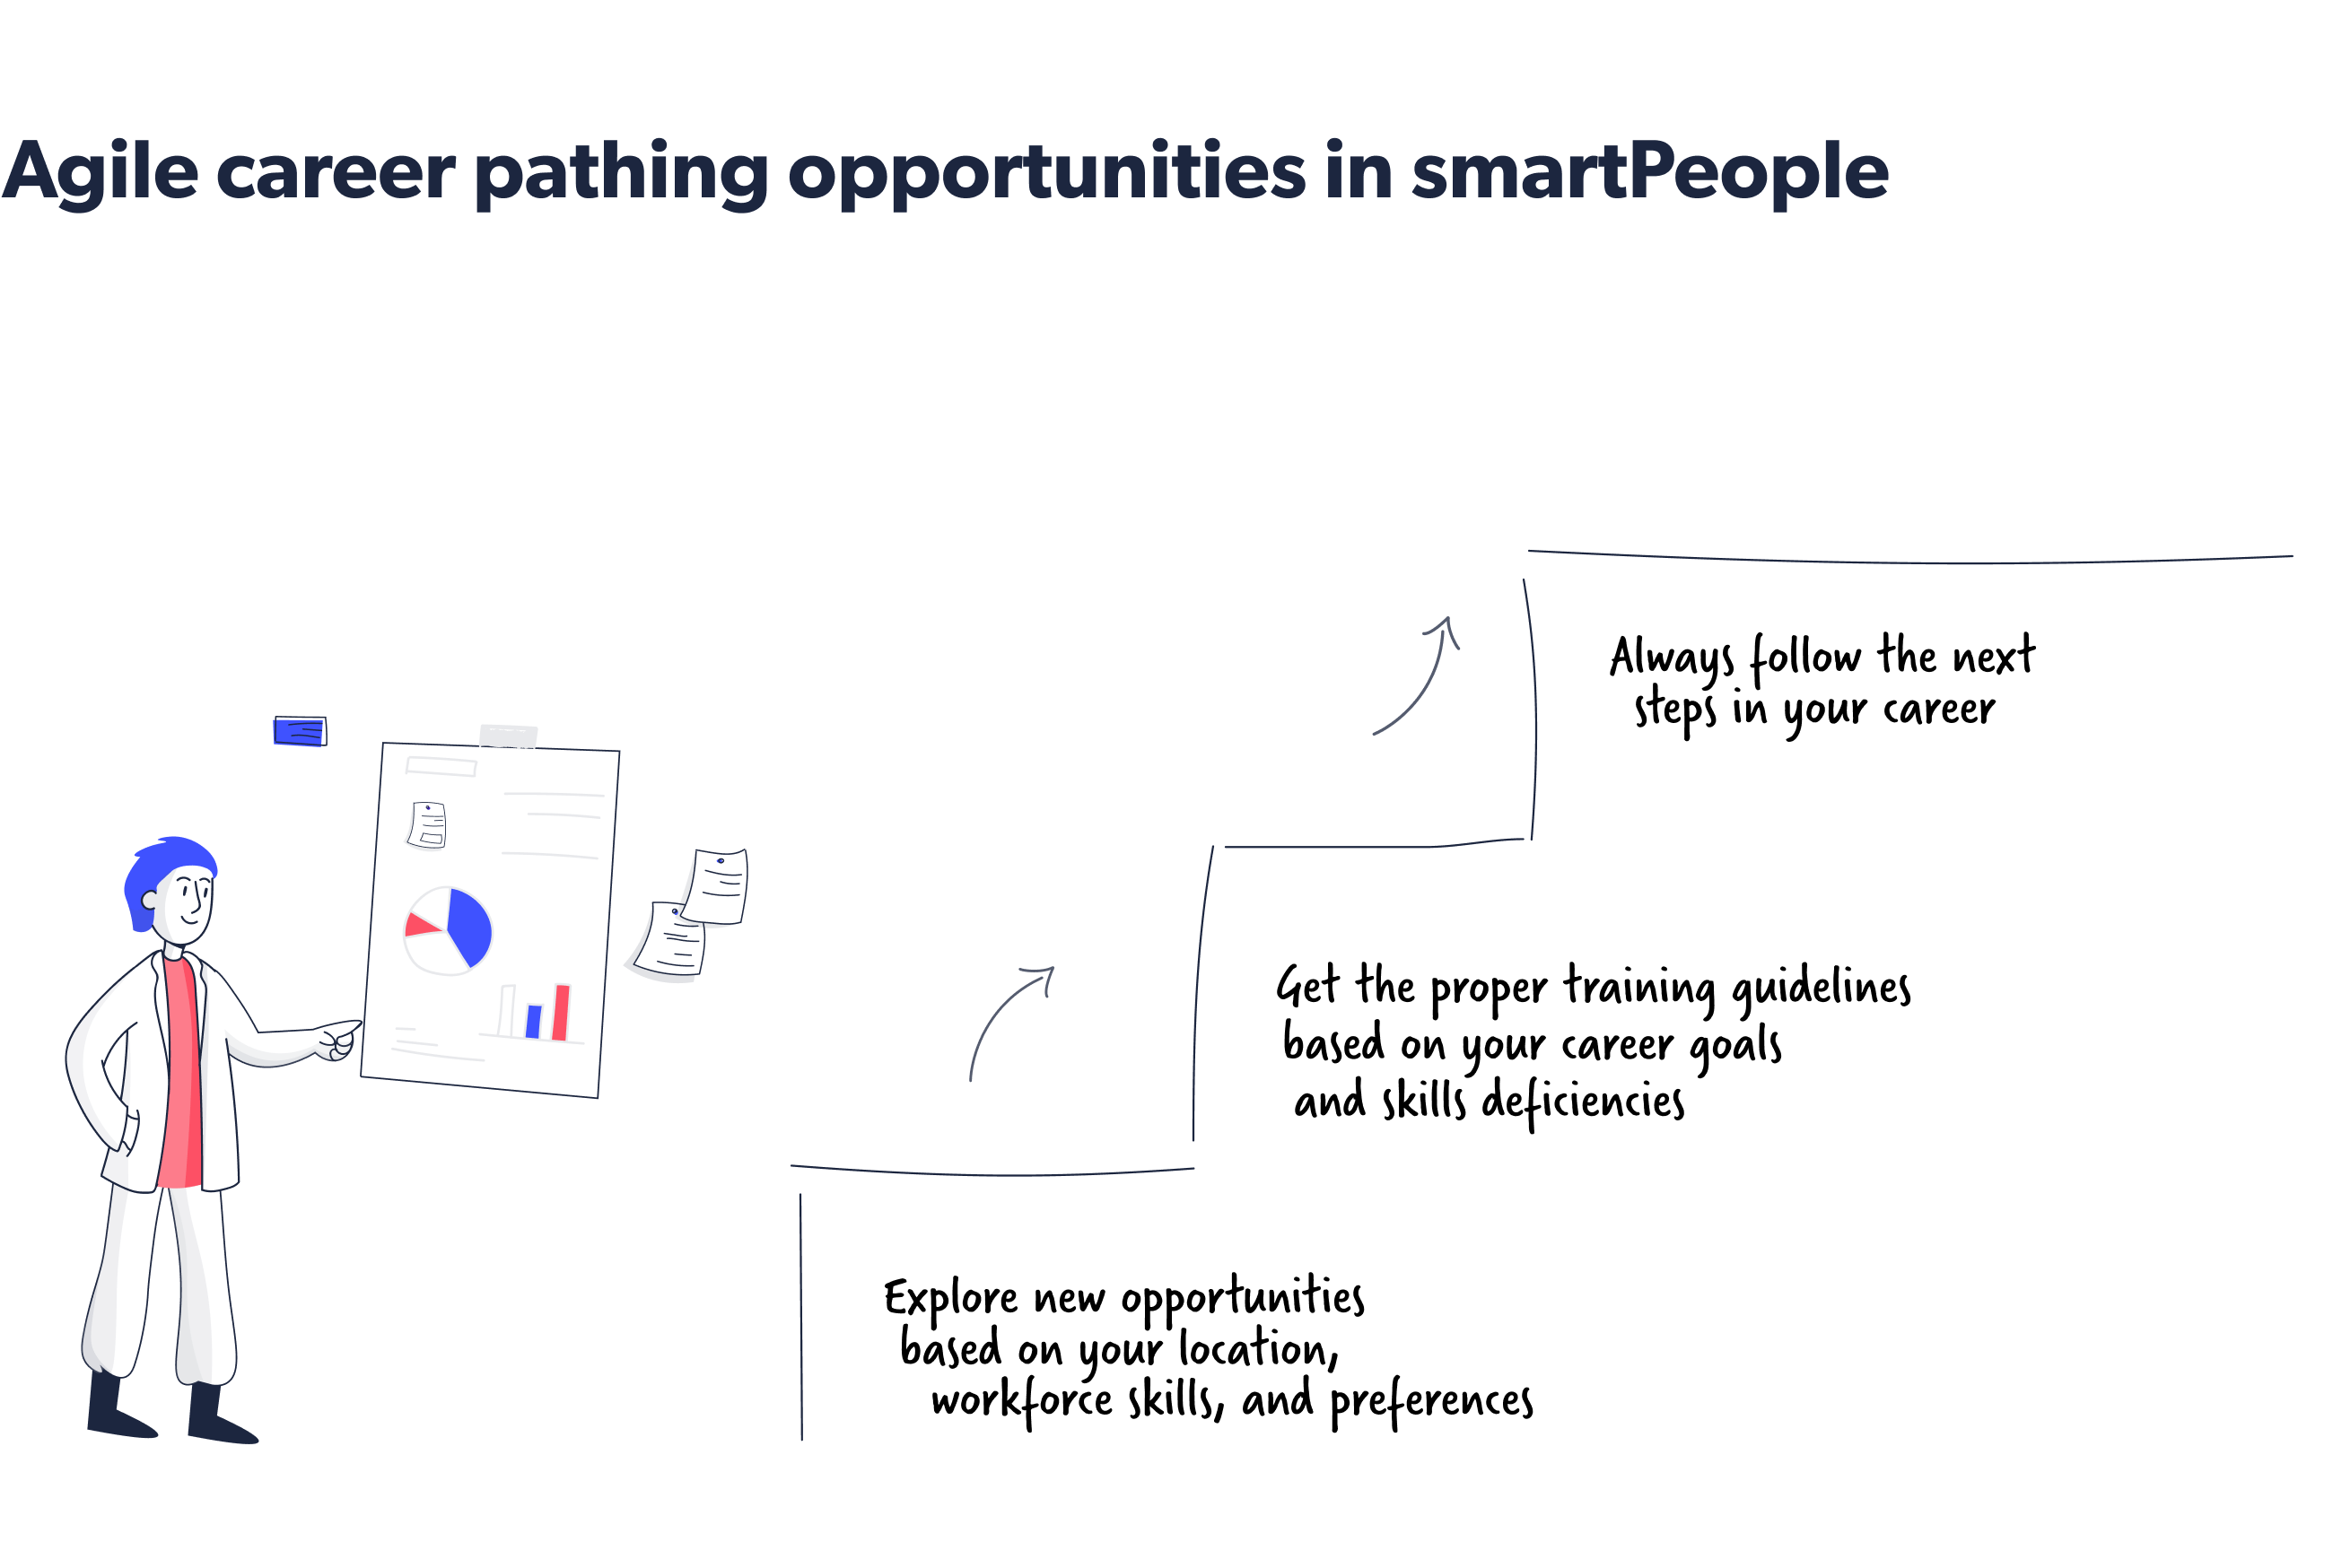 Agile career pathing opportunities in smartPeople